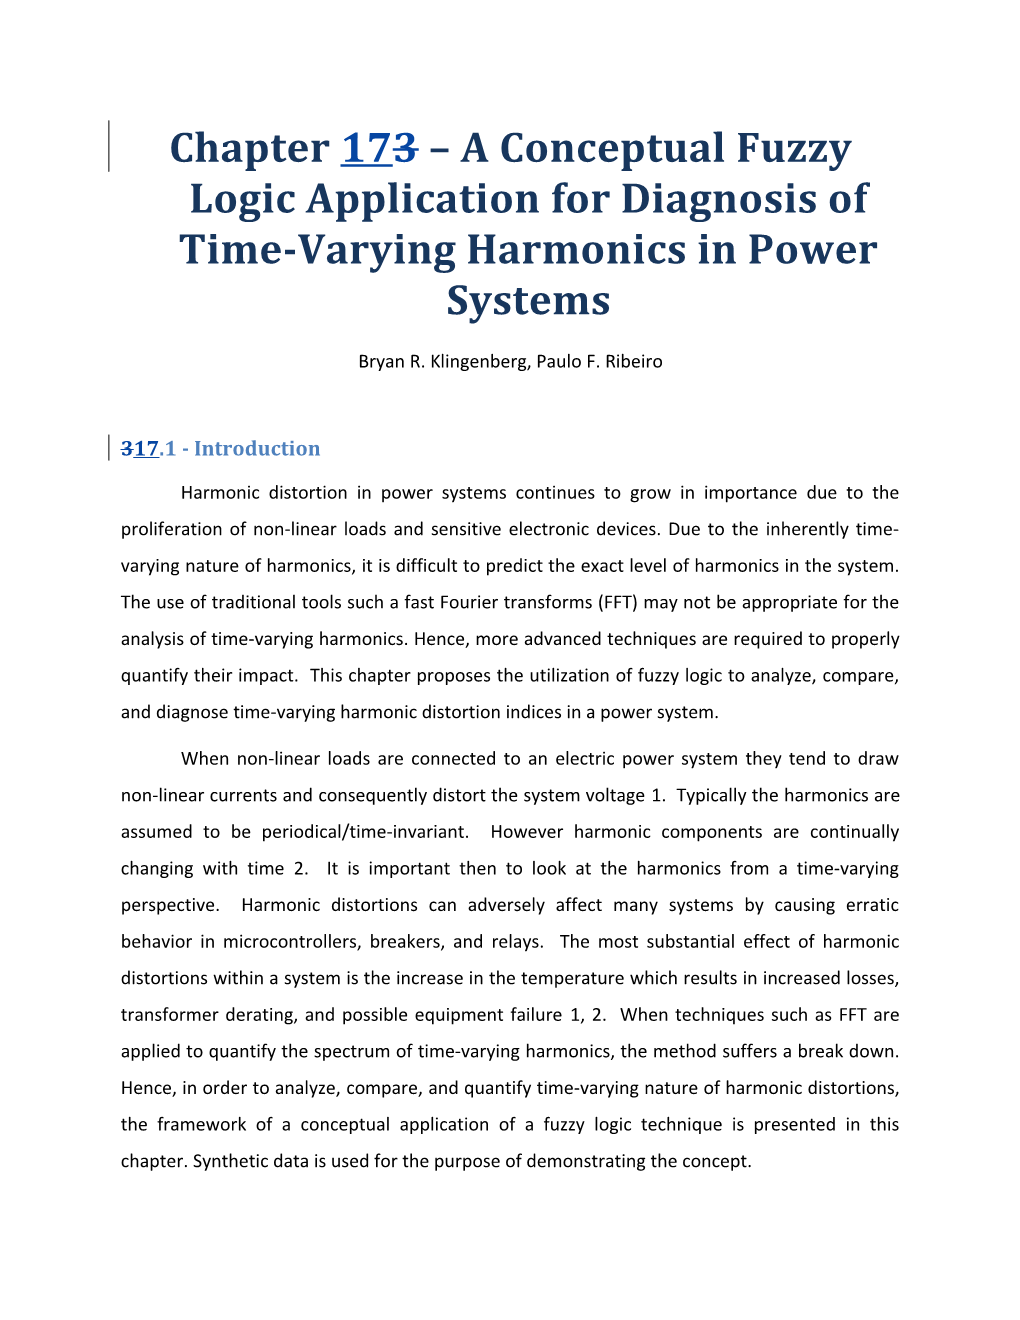 Chapter 173 a Conceptual Fuzzy Logic Application for Diagnosis of Time-Varying Harmonics